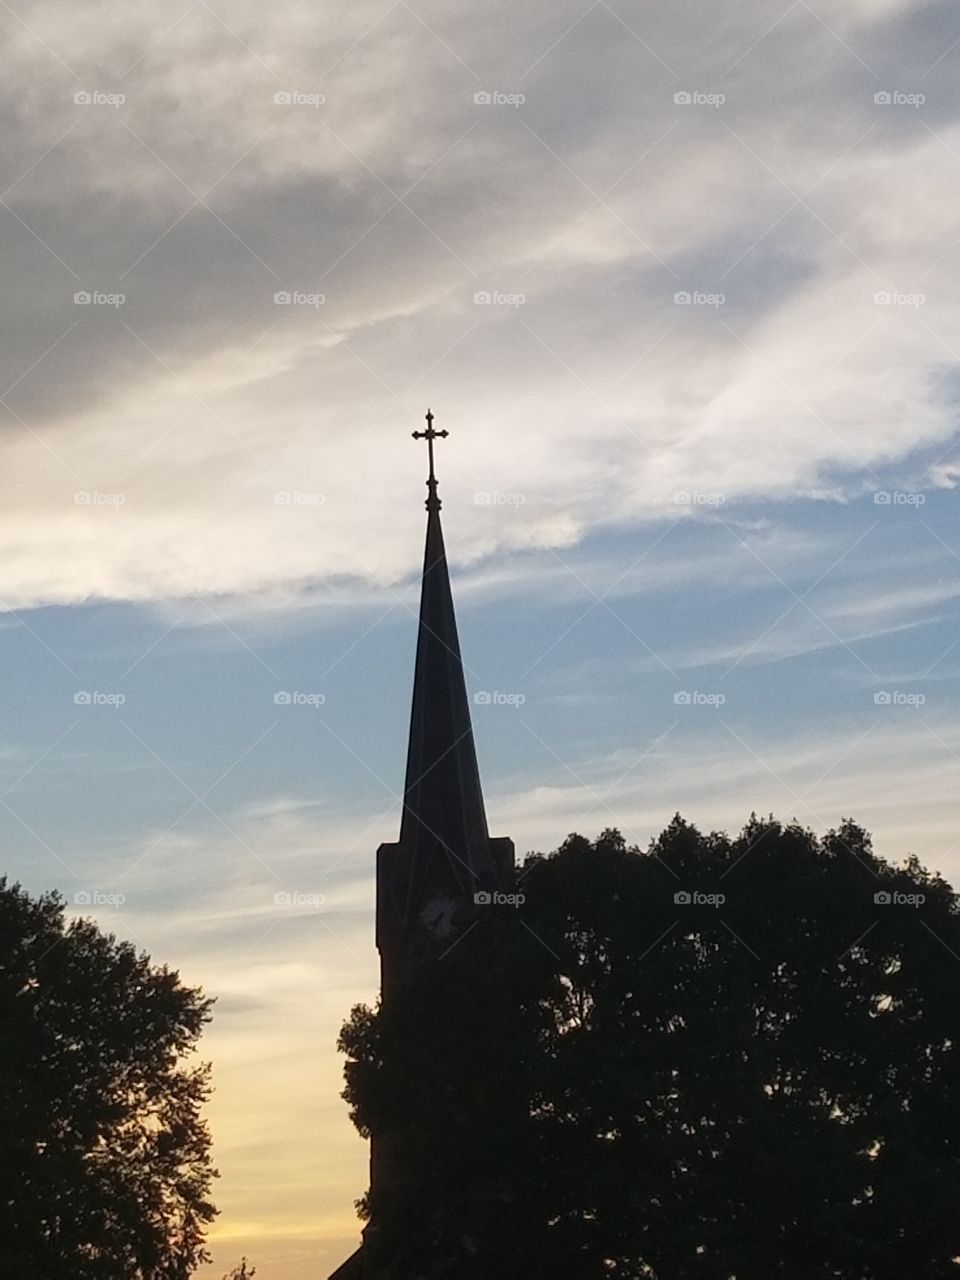 The Cross at Sunset